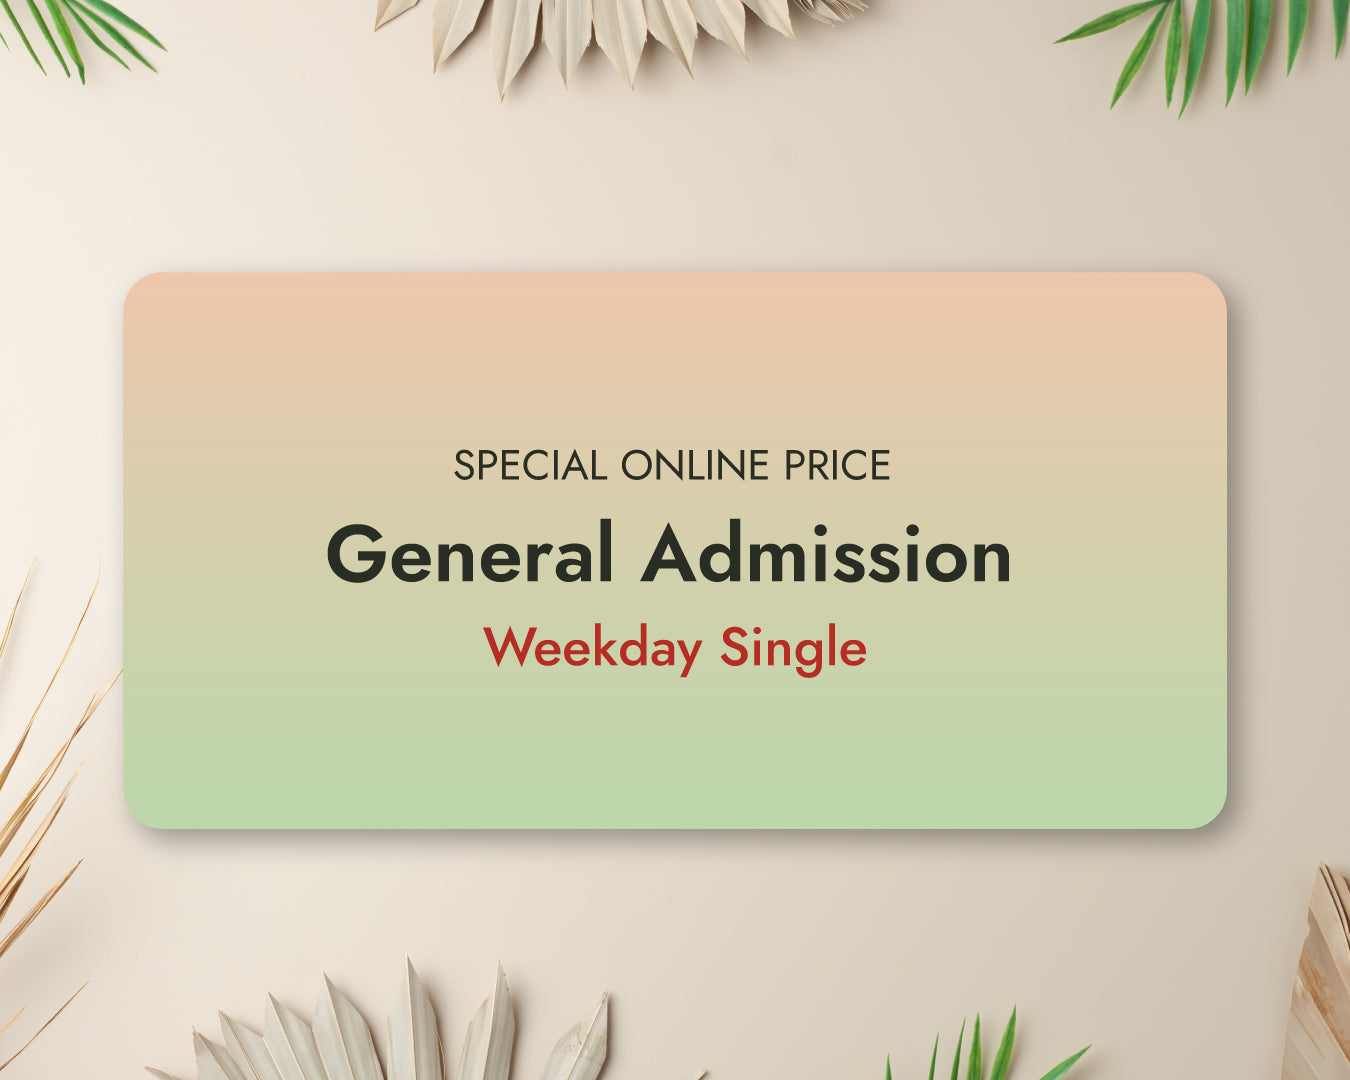 Weekday General Admission for One